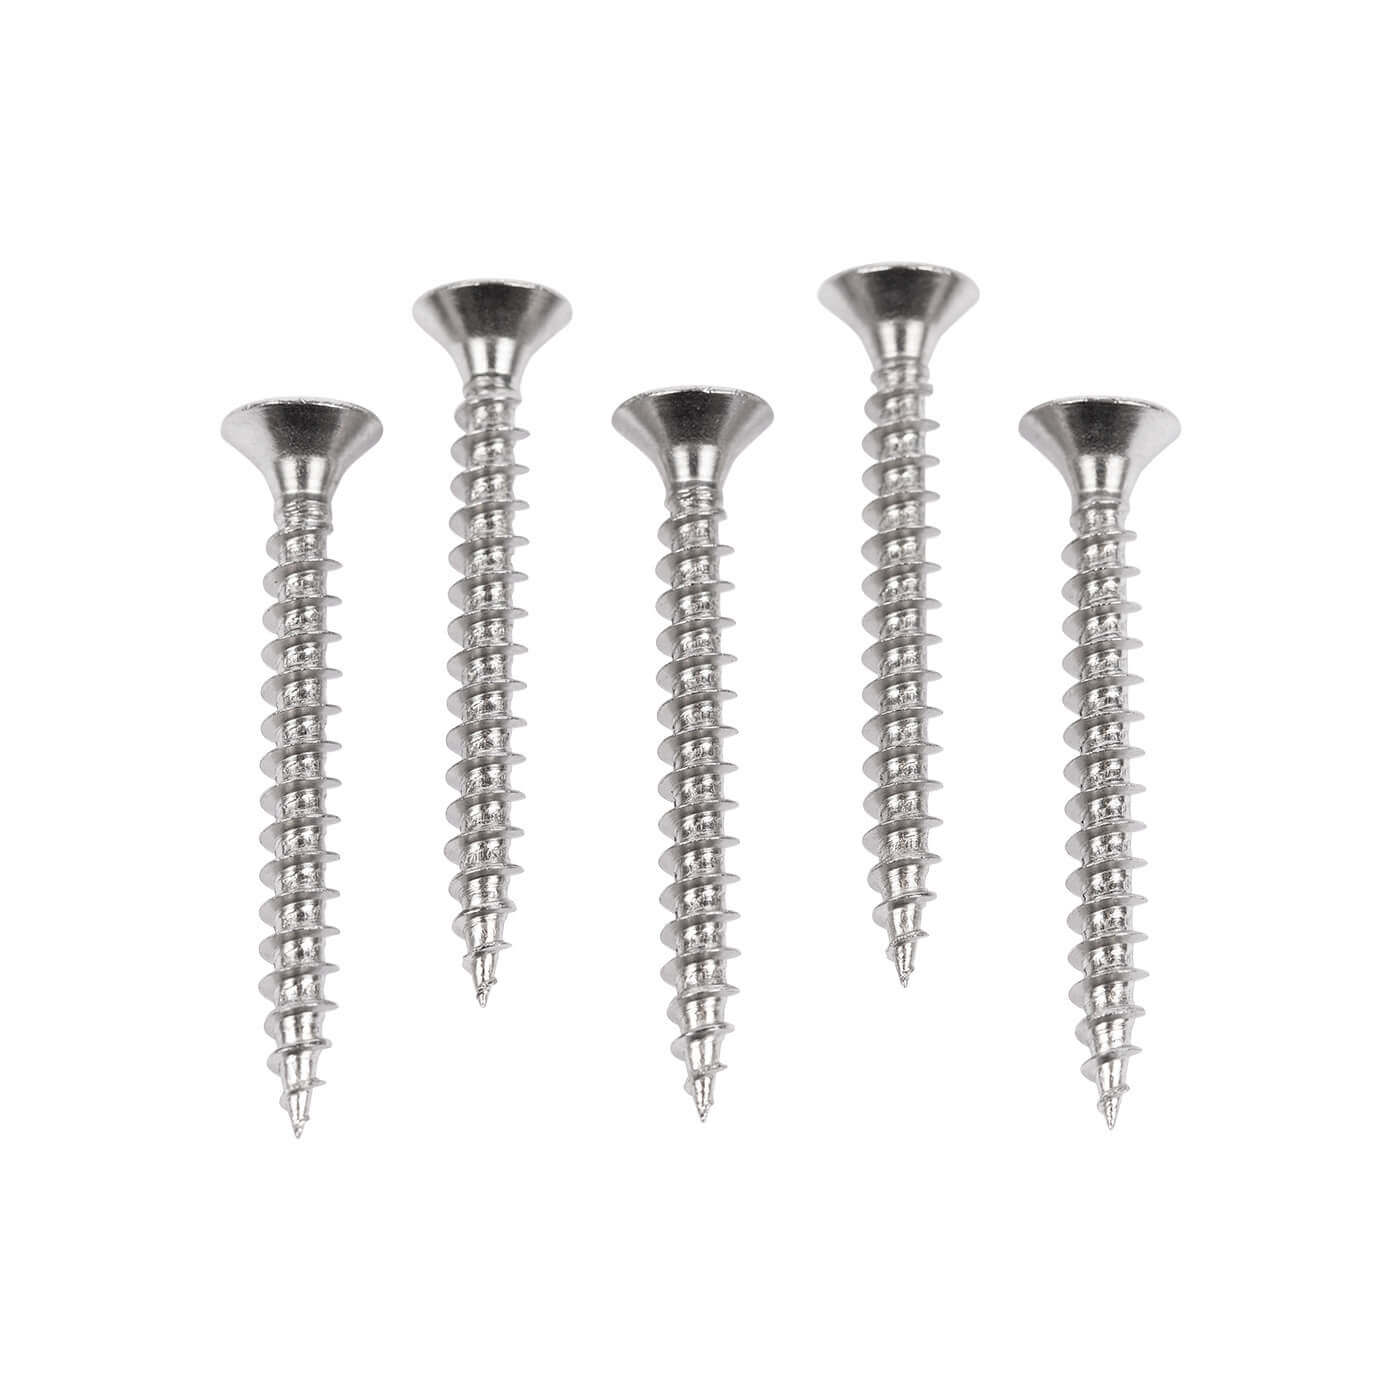 Hydrant Mounting Screws - Pack of 5